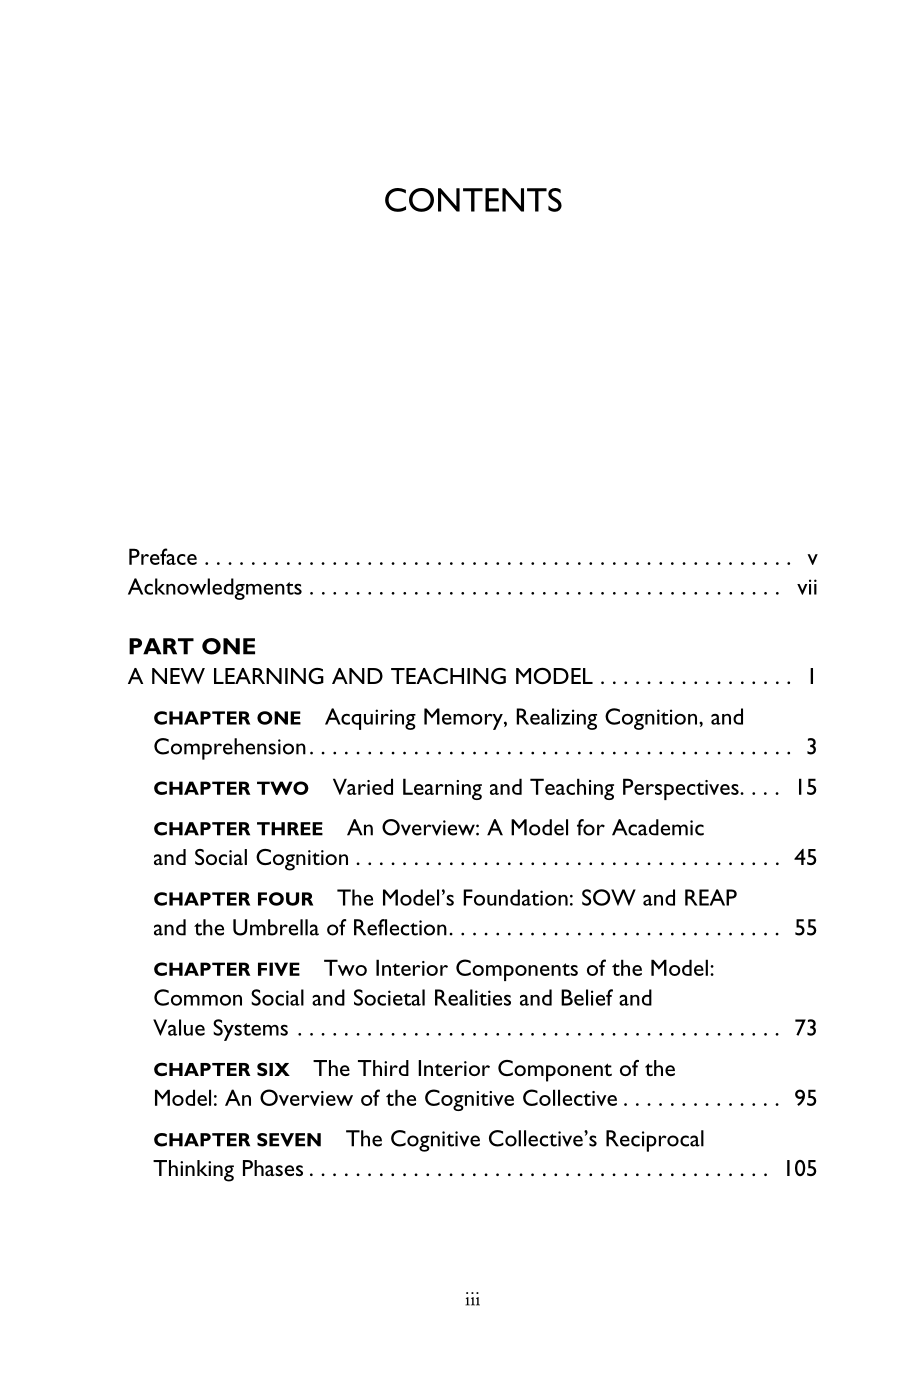 Teaching and Learning - A Model for Academic and Social Cognition 2011_第4页